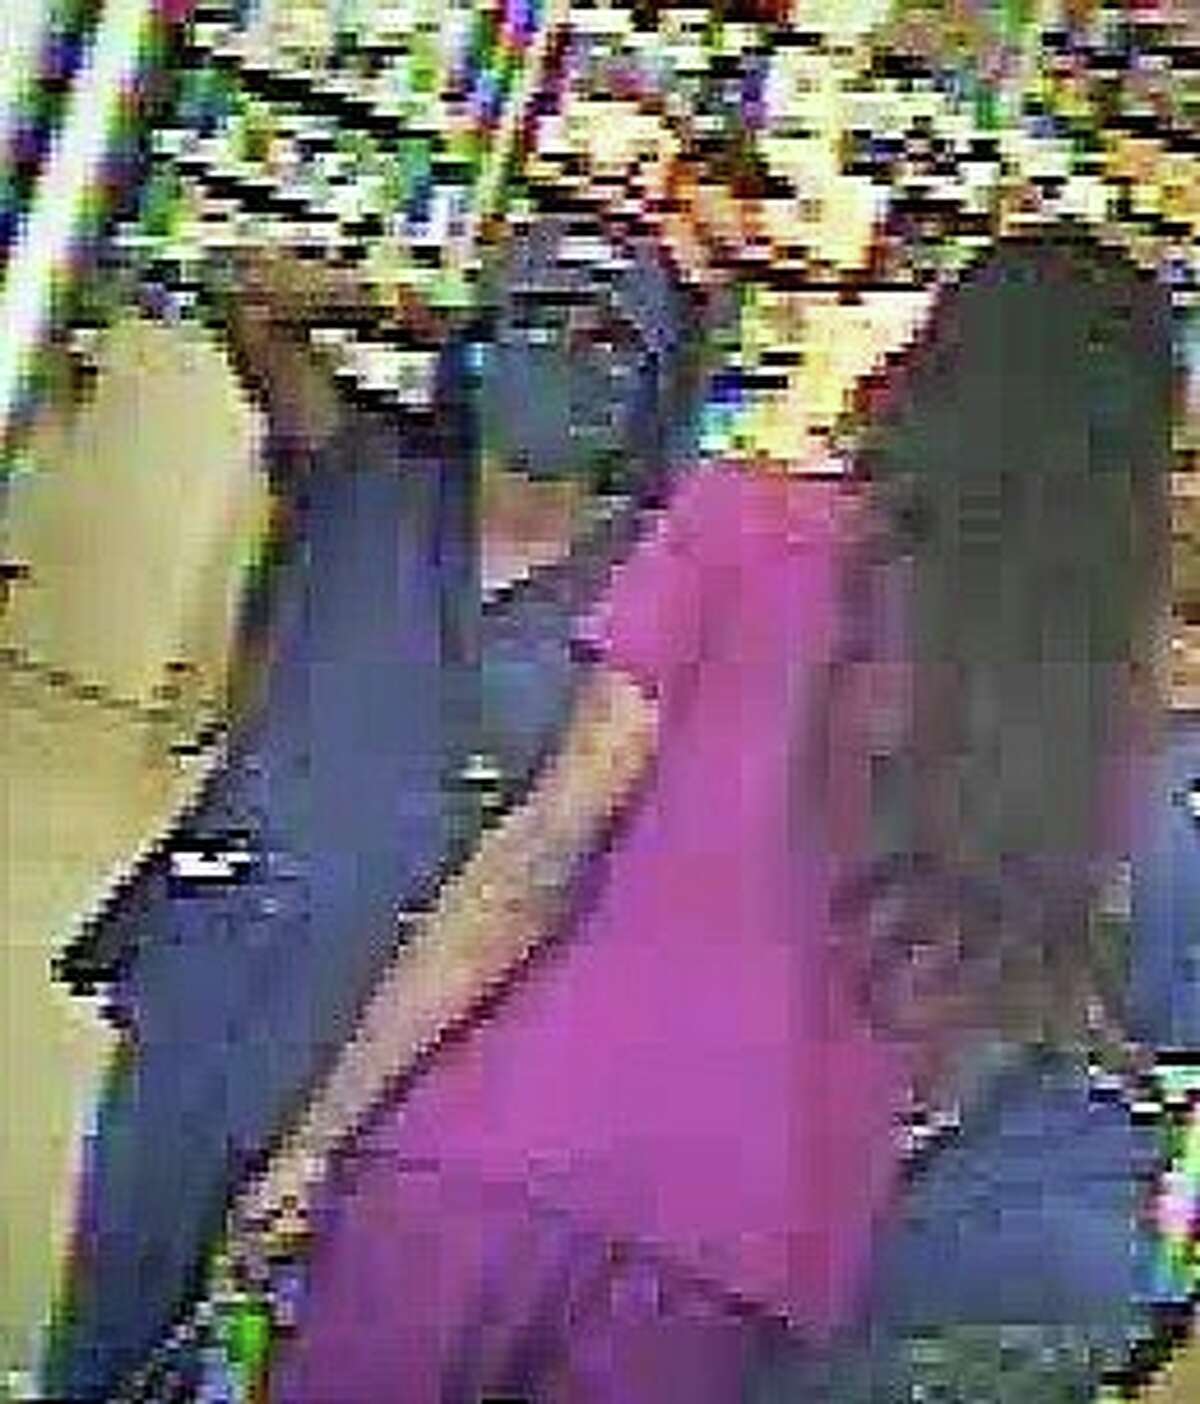 The Midland Police Department is searching for the scrub-wearing thieves that used a stolen credit card on June 7 to buy several items at Sam's Club. The thieves left the store with more than $10,000 worth of merchandise. 